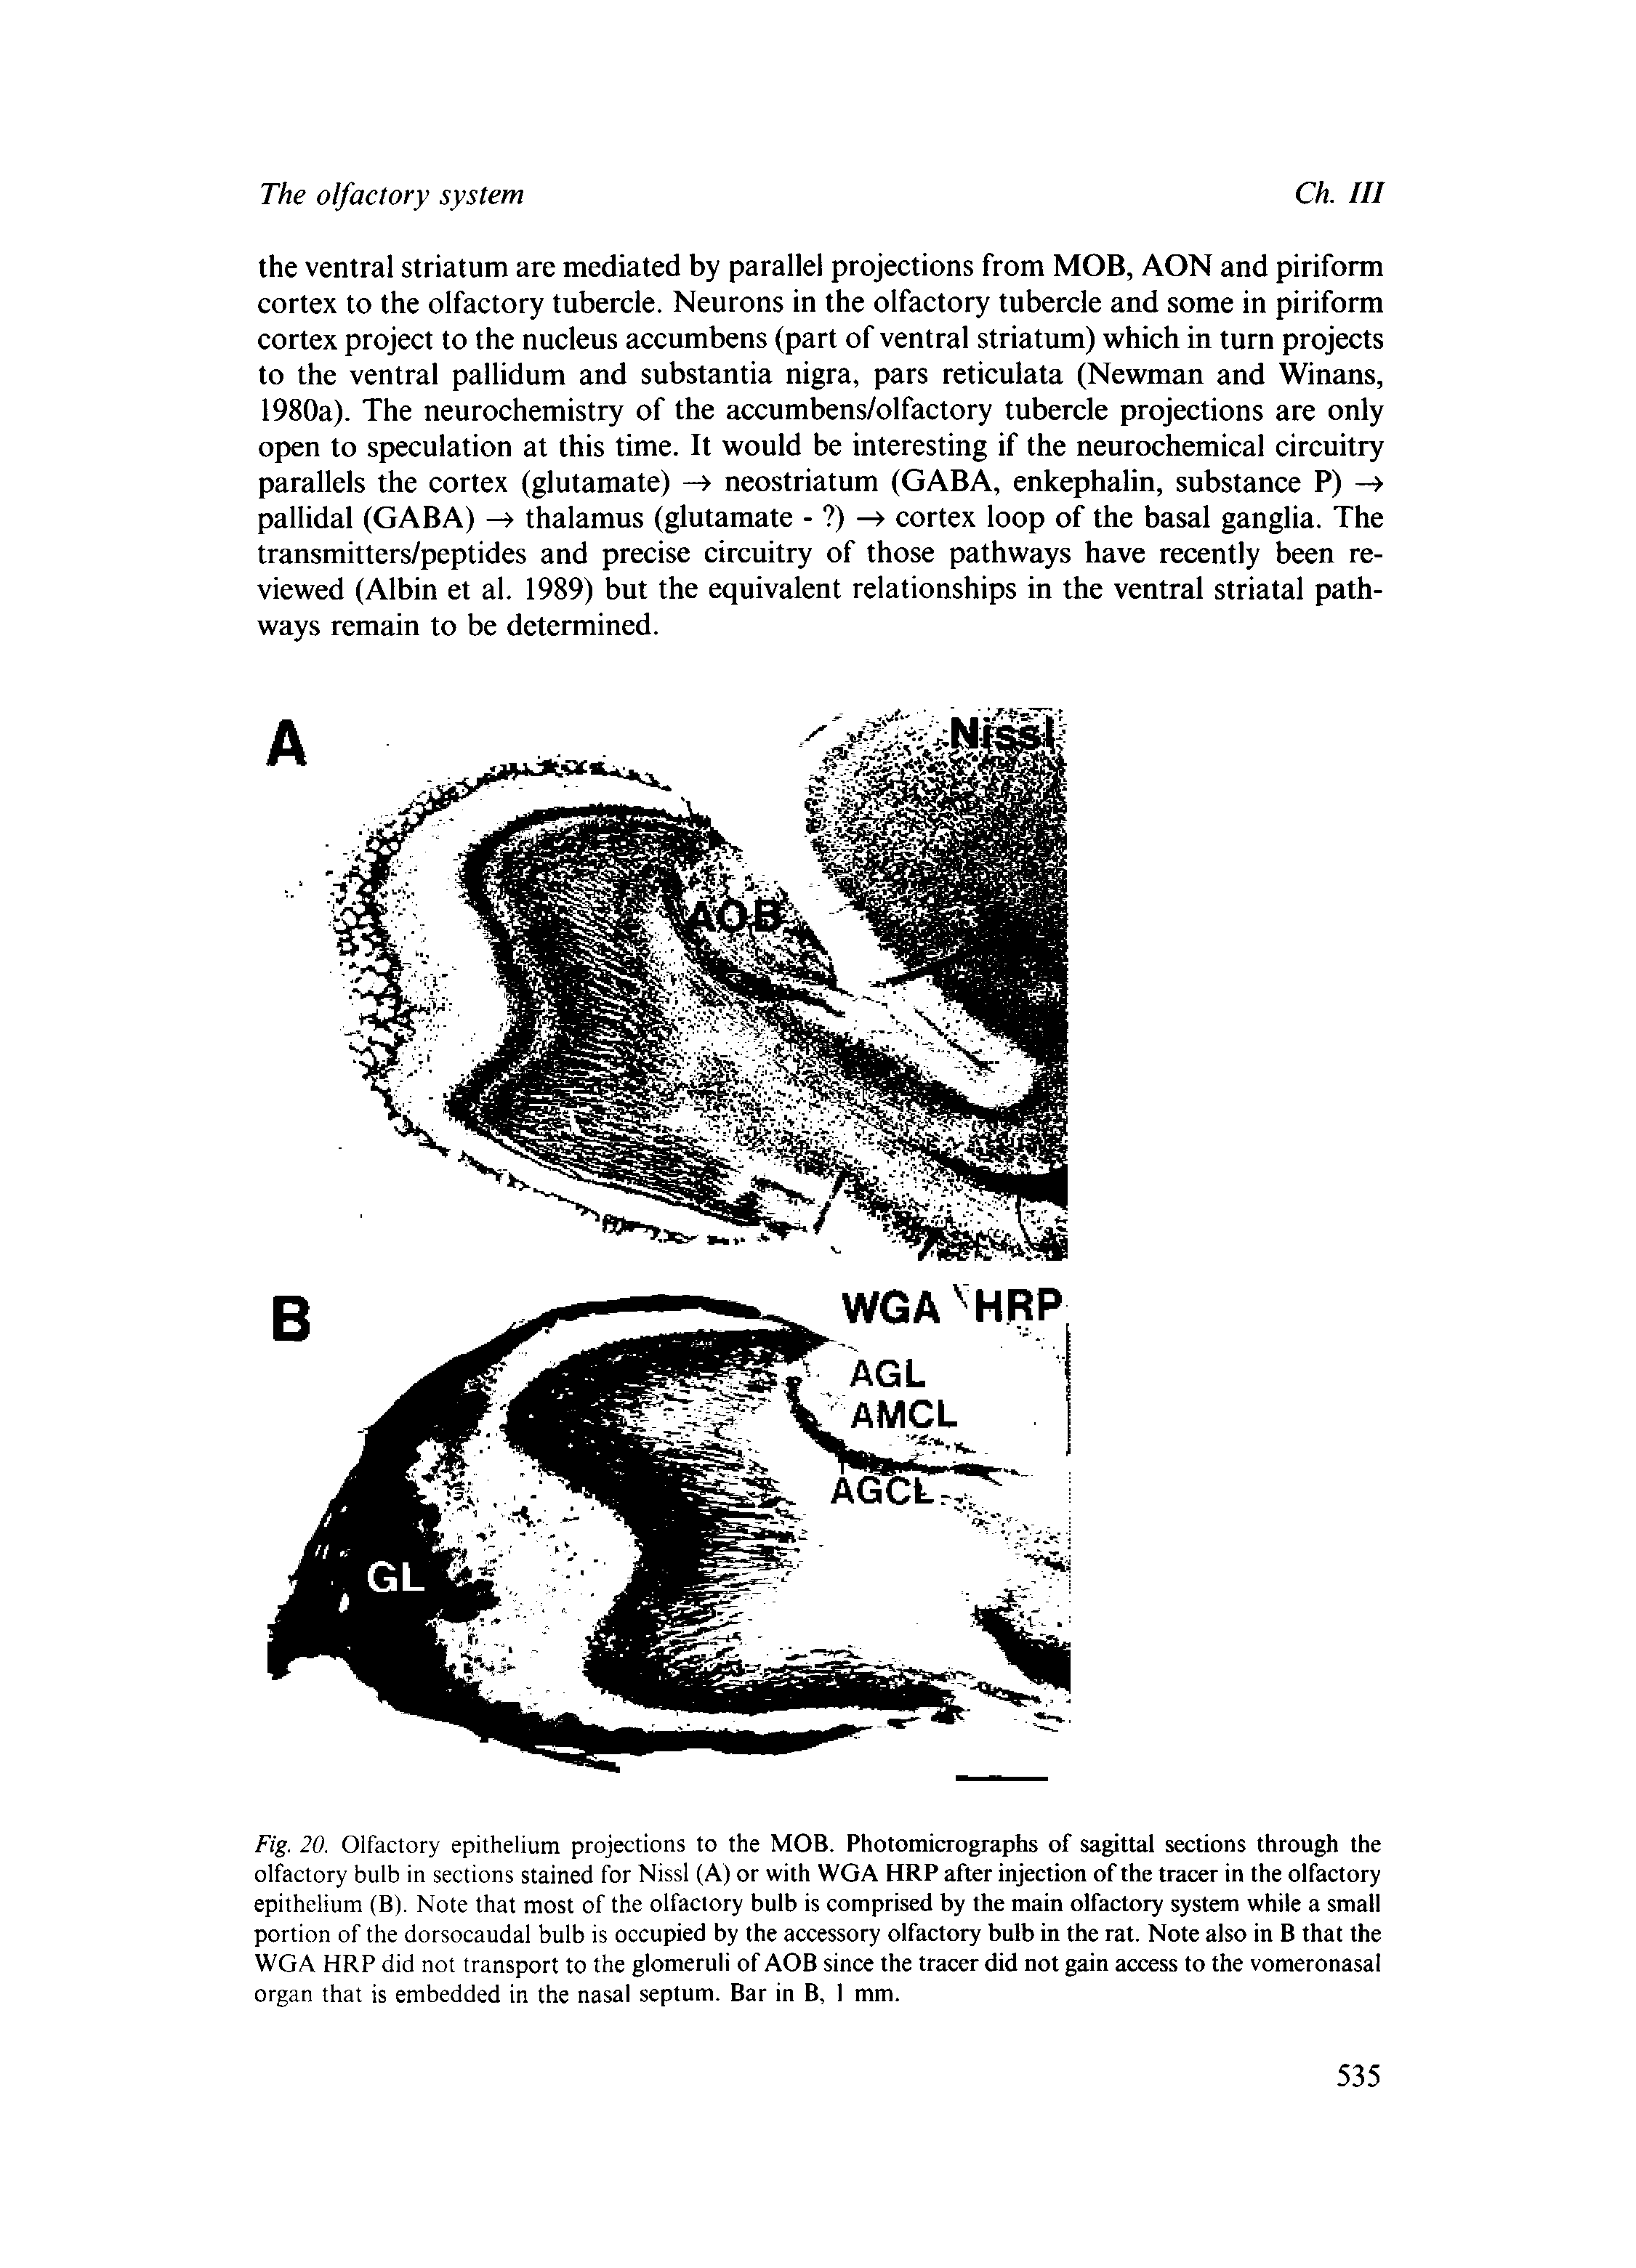 Fig. 20. Olfactory epithelium projections to the MOB. Photomicrographs of sagittal sections through the olfactory bulb In sections stained for Nissl (A) or with WGA HRP after injection of the tracer in the olfactory epithelium (B). Note that most of the olfactory bulb is comprised by the main olfactory system while a small portion of the dorsocaudal bulb is occupied by the accessory olfactory bulb in the rat. Note also in B that the WGA HRP did not transport to the glomeruli of AOB since the tracer did not gain access to the vomeronasal organ that is embedded in the nasal septum. Bar in B, 1 mm.